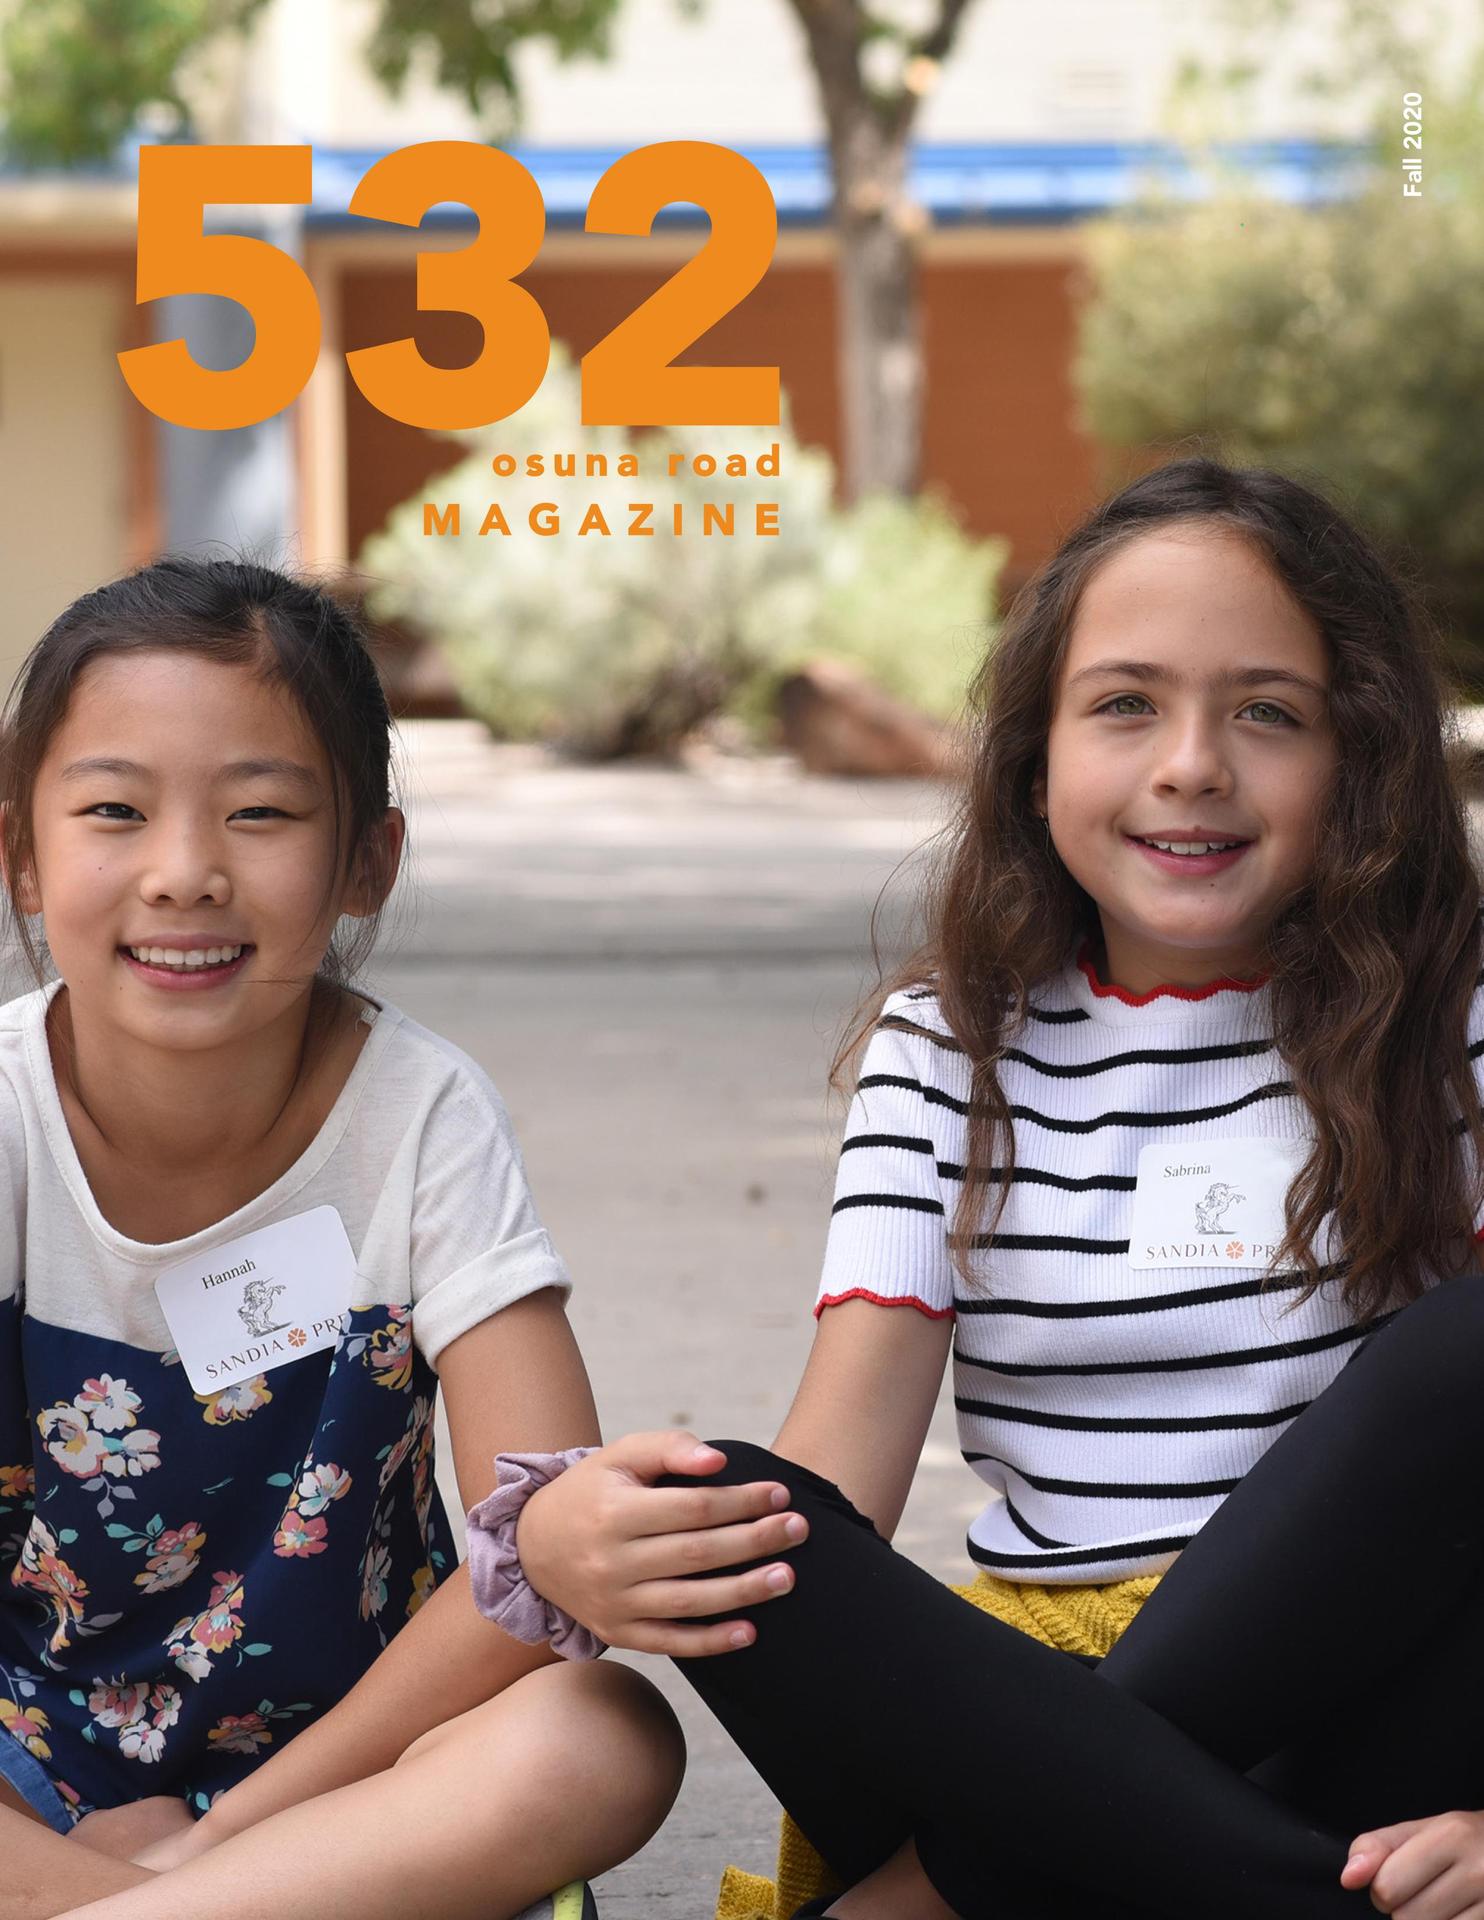 532 magazine cover of two students